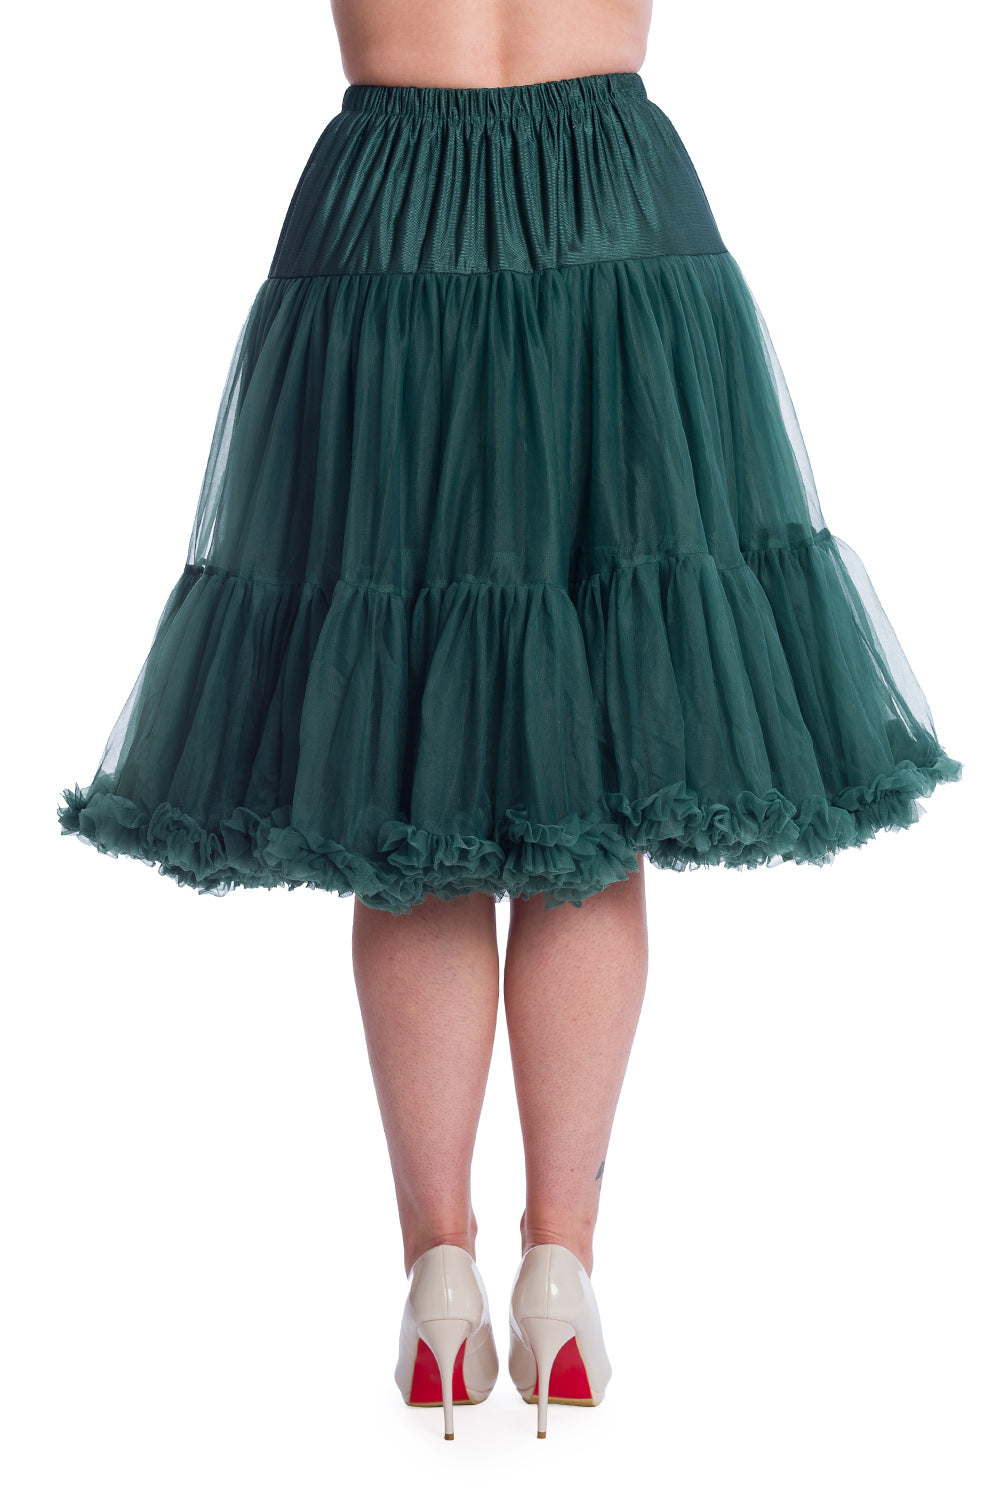 Dancing Days Lifeforms 50s Style 25"-27" Long Petticoat In Bottle Green